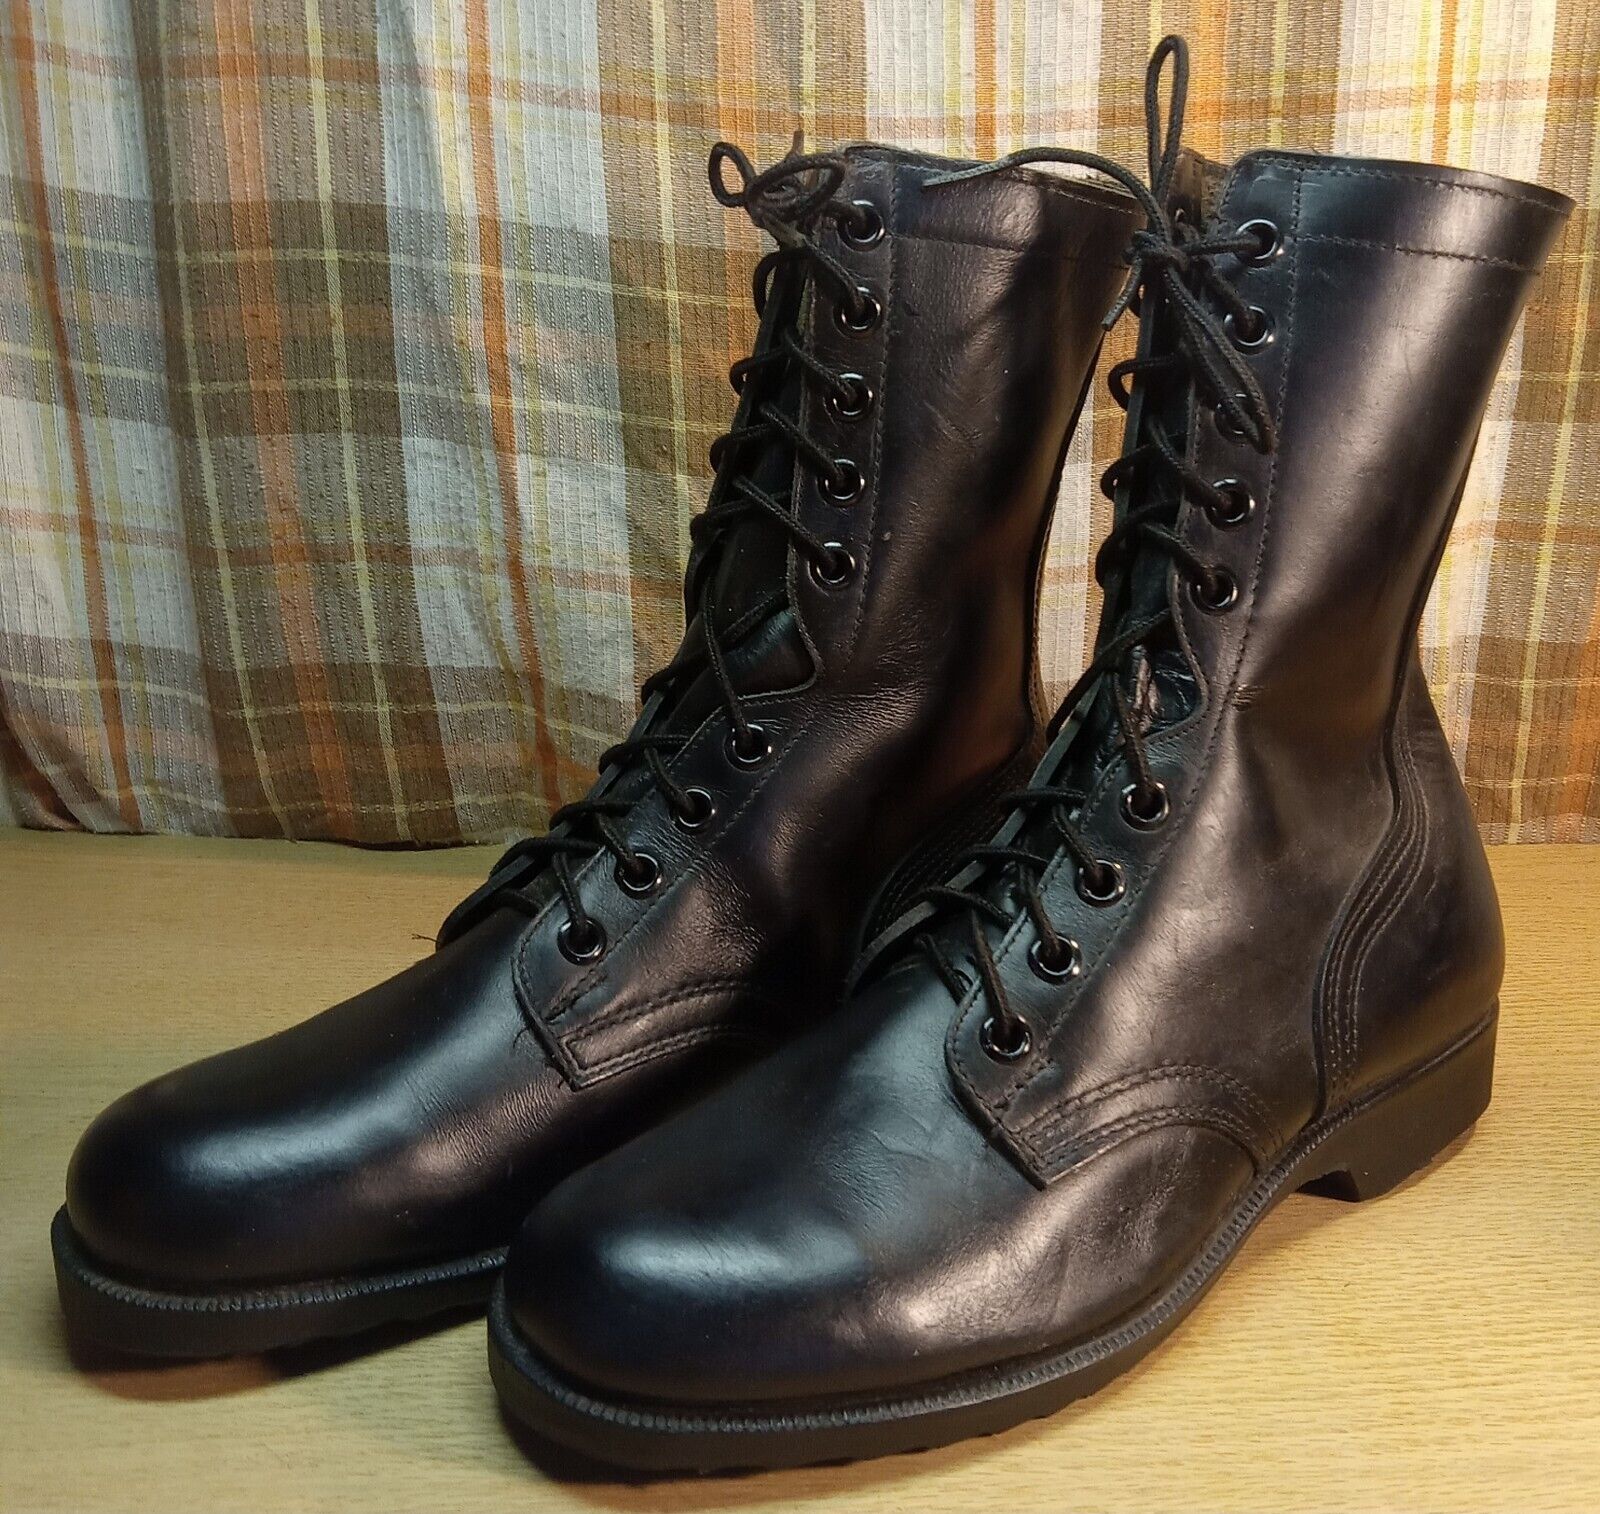 Vintage 1981 RO-SEARCH Military Combat Boots Men’s Size 10 R 1981 Black Jump